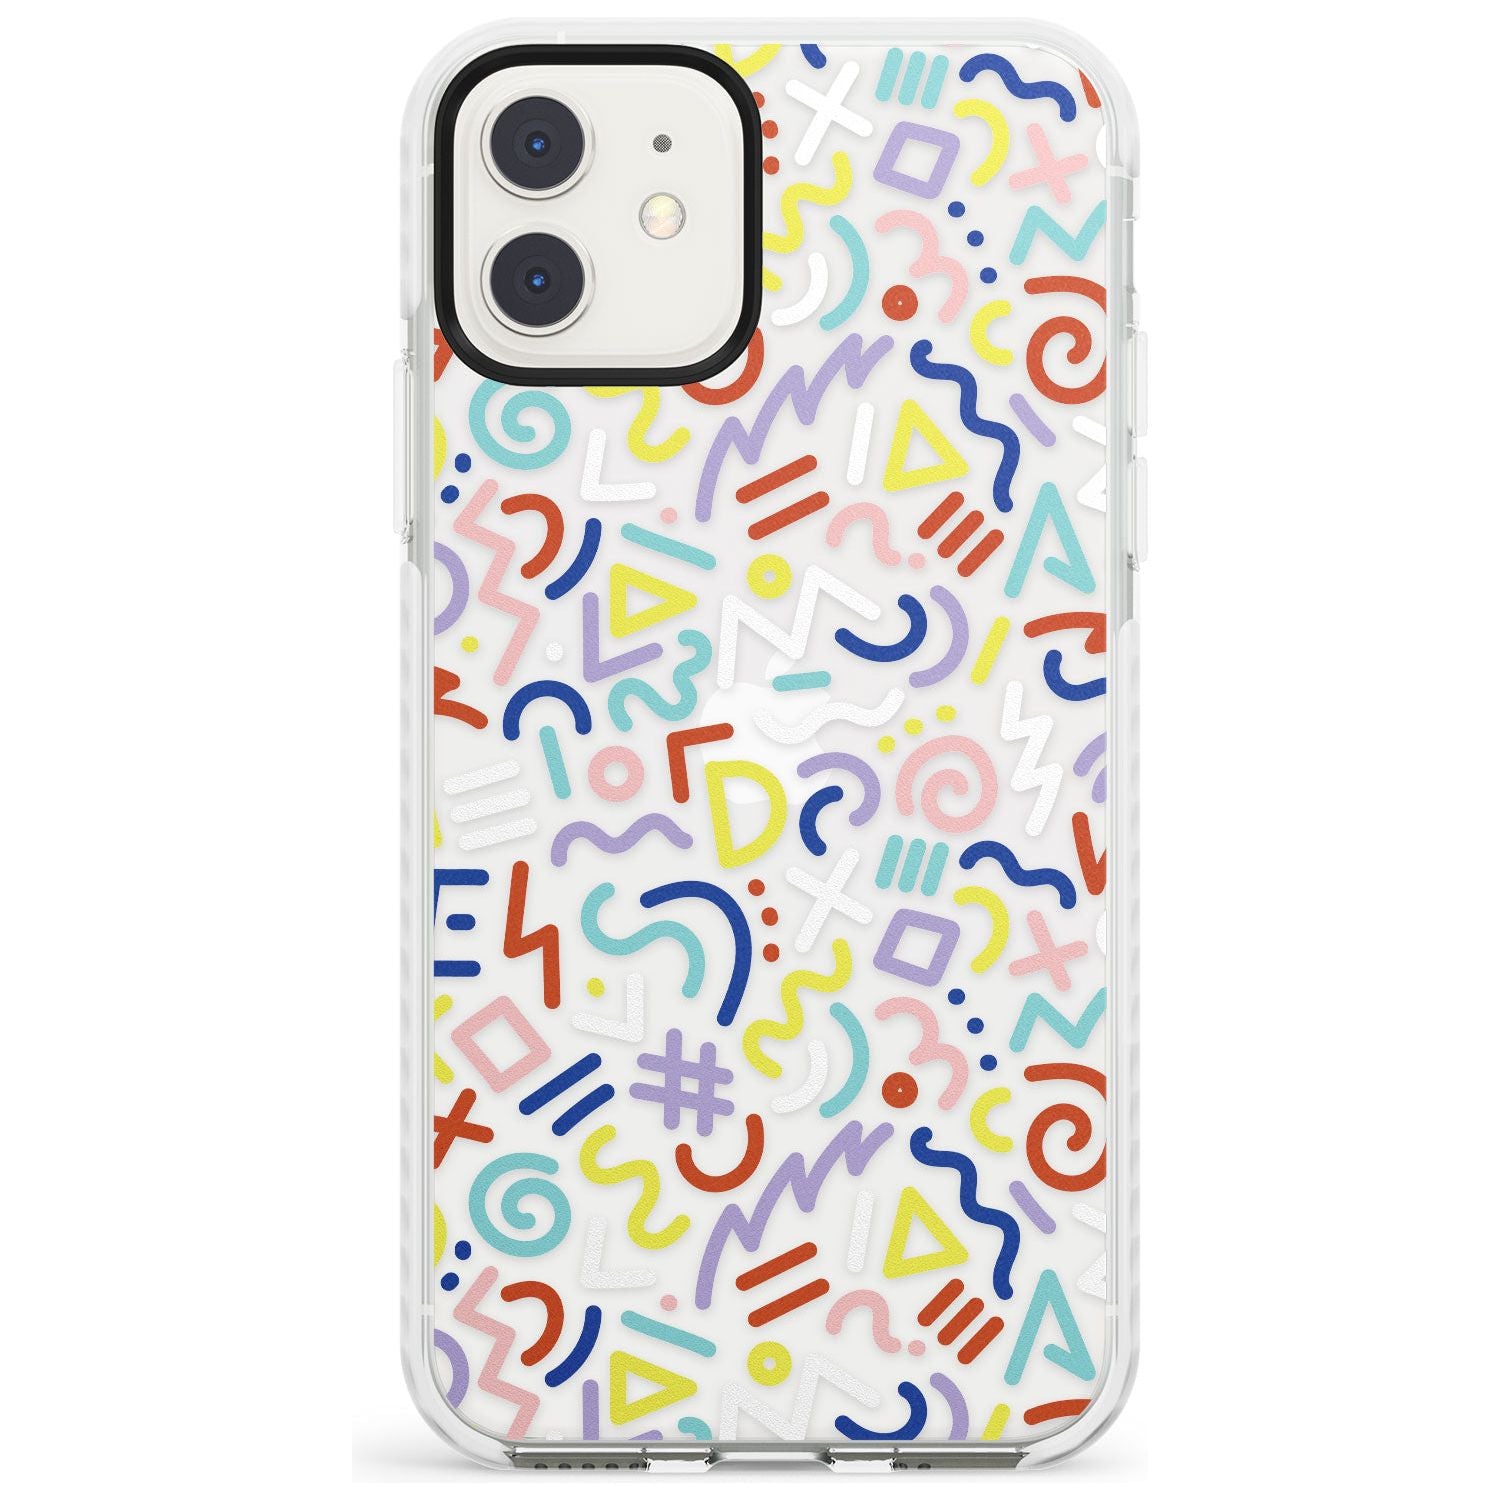 Colourful Mixed Shapes Retro Pattern Design Impact Phone Case for iPhone 11